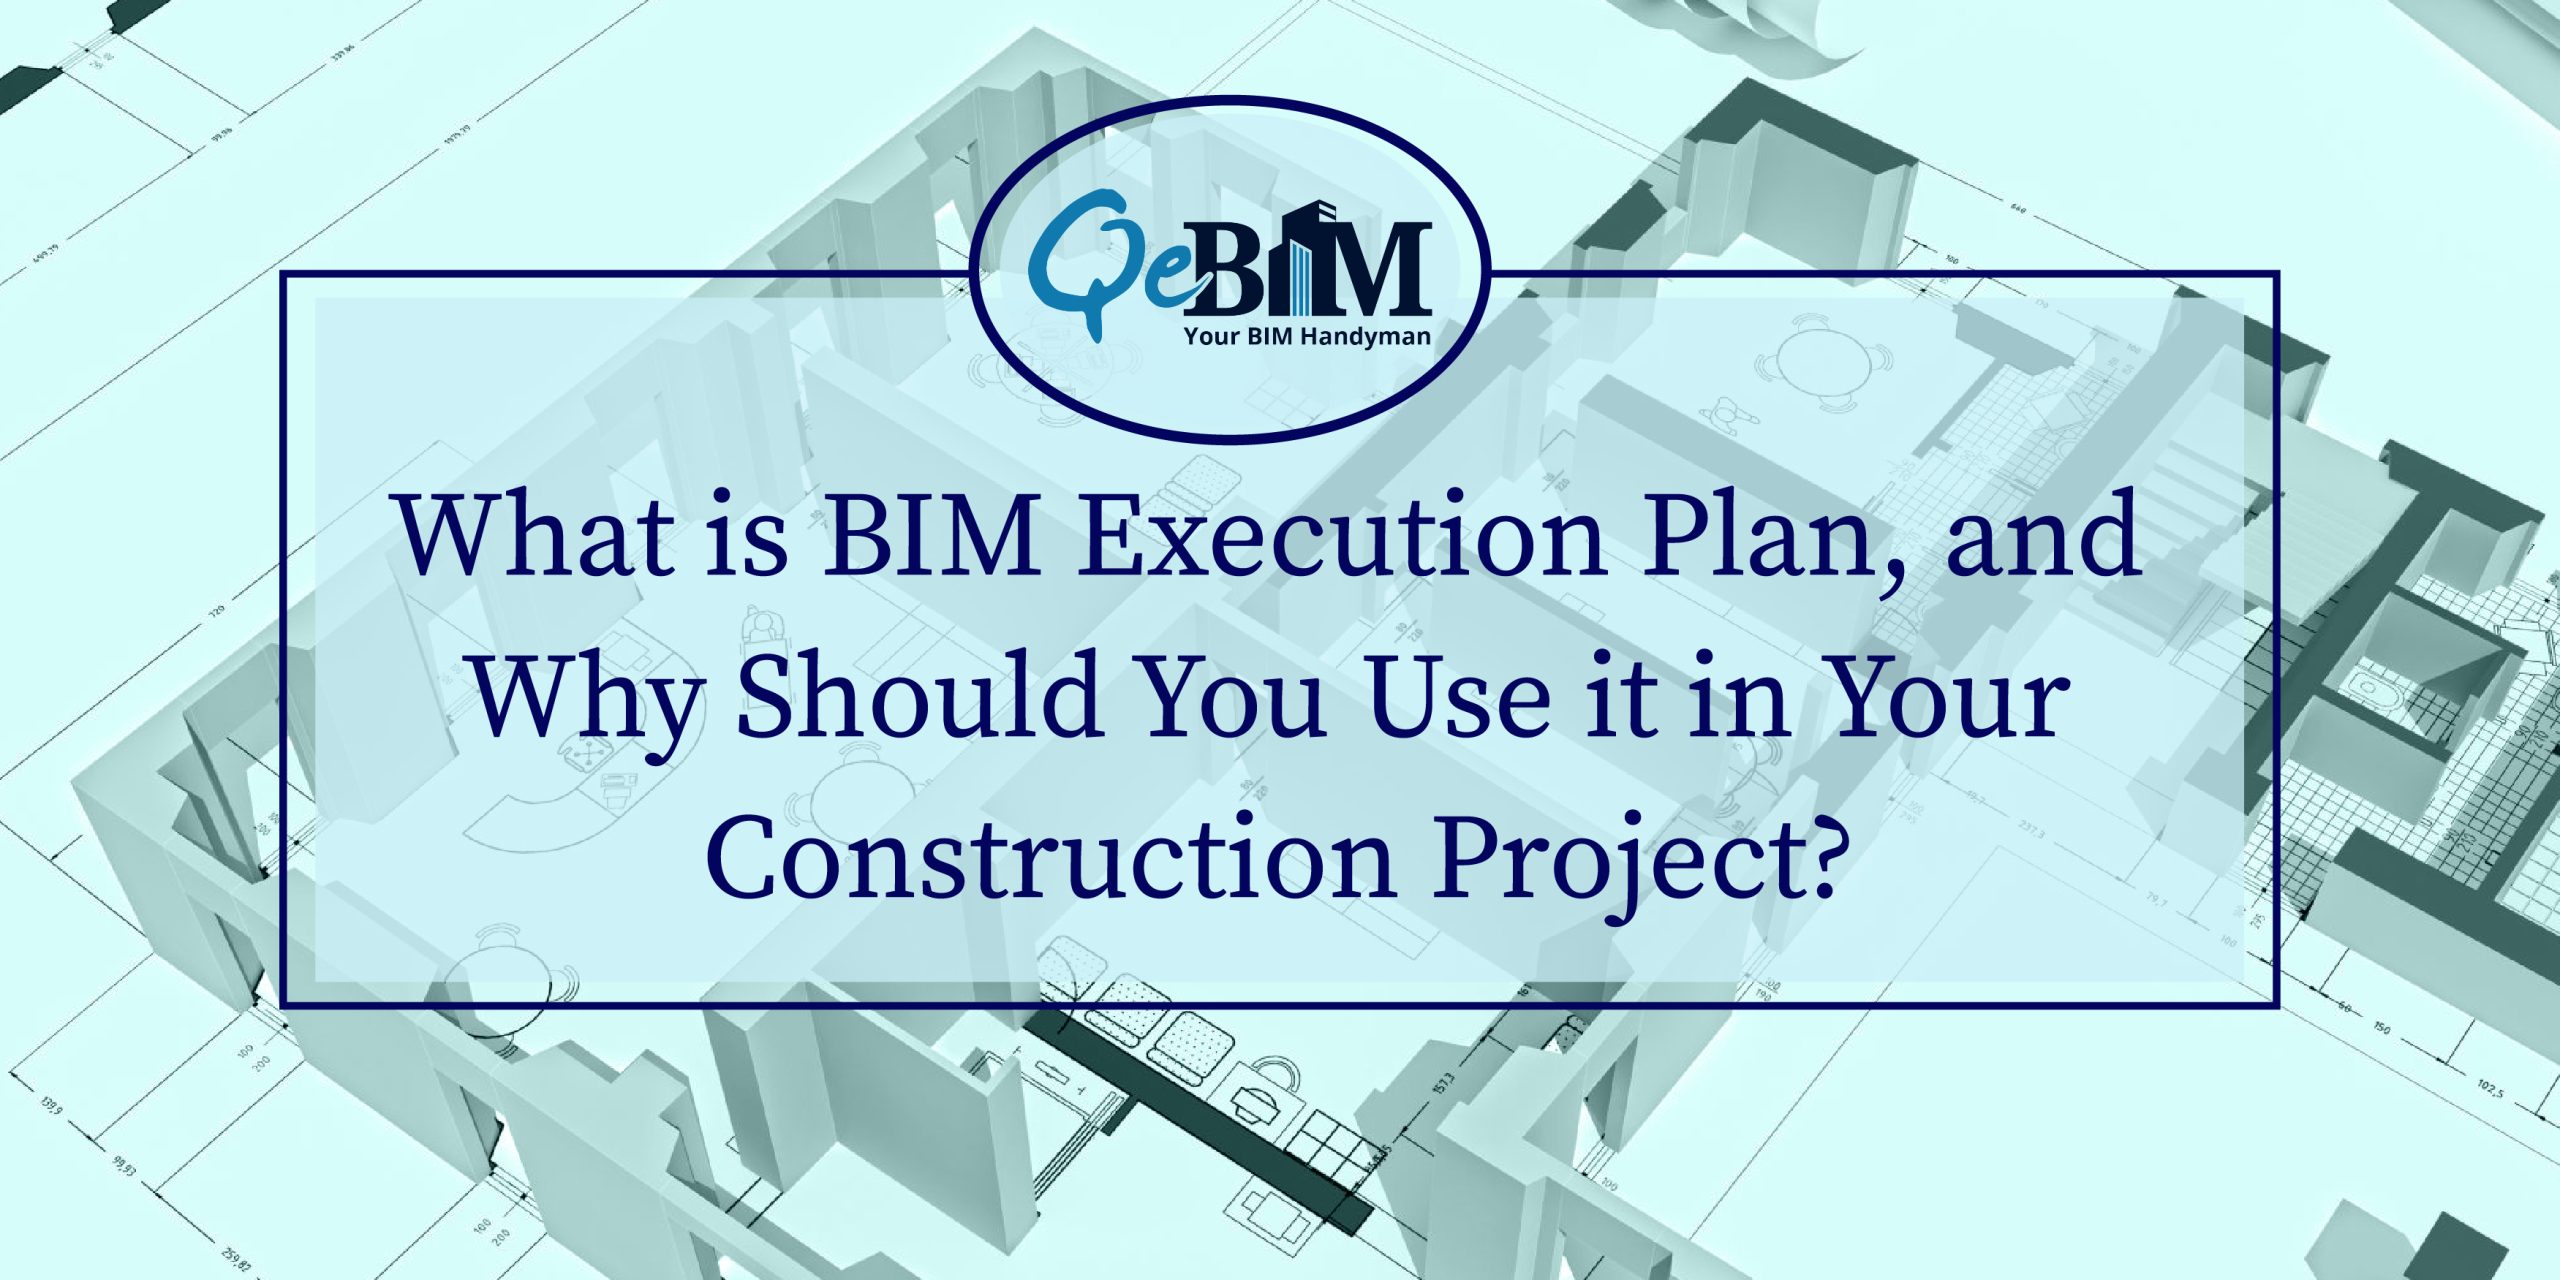 What is BIM Execution Plan, and Why Should You Use it in Your Construction Project?